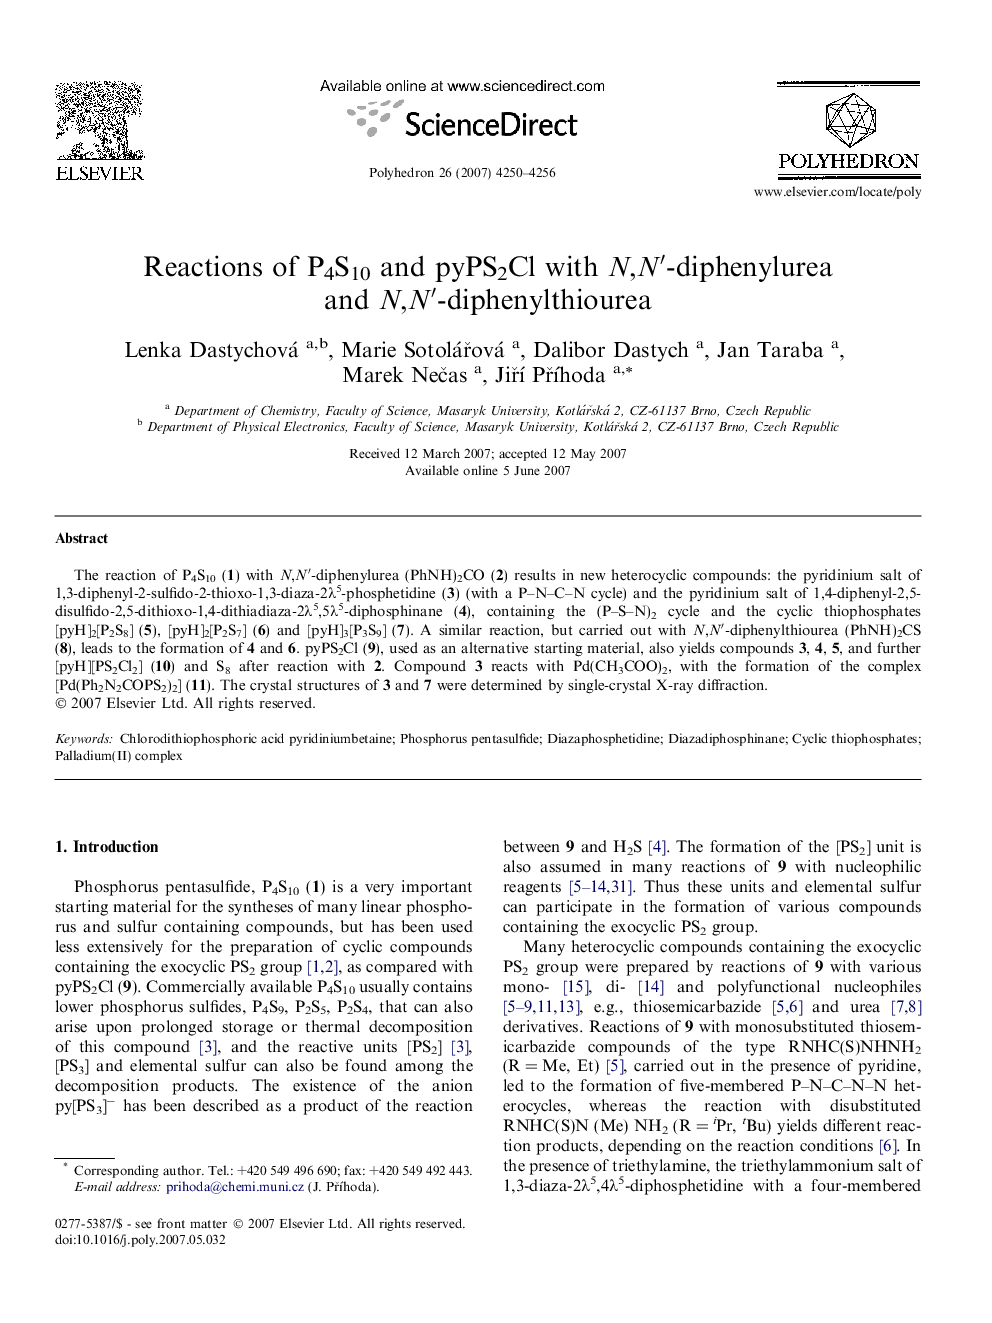 Reactions of P4S10 and pyPS2Cl with N,N′-diphenylurea and N,N′-diphenylthiourea